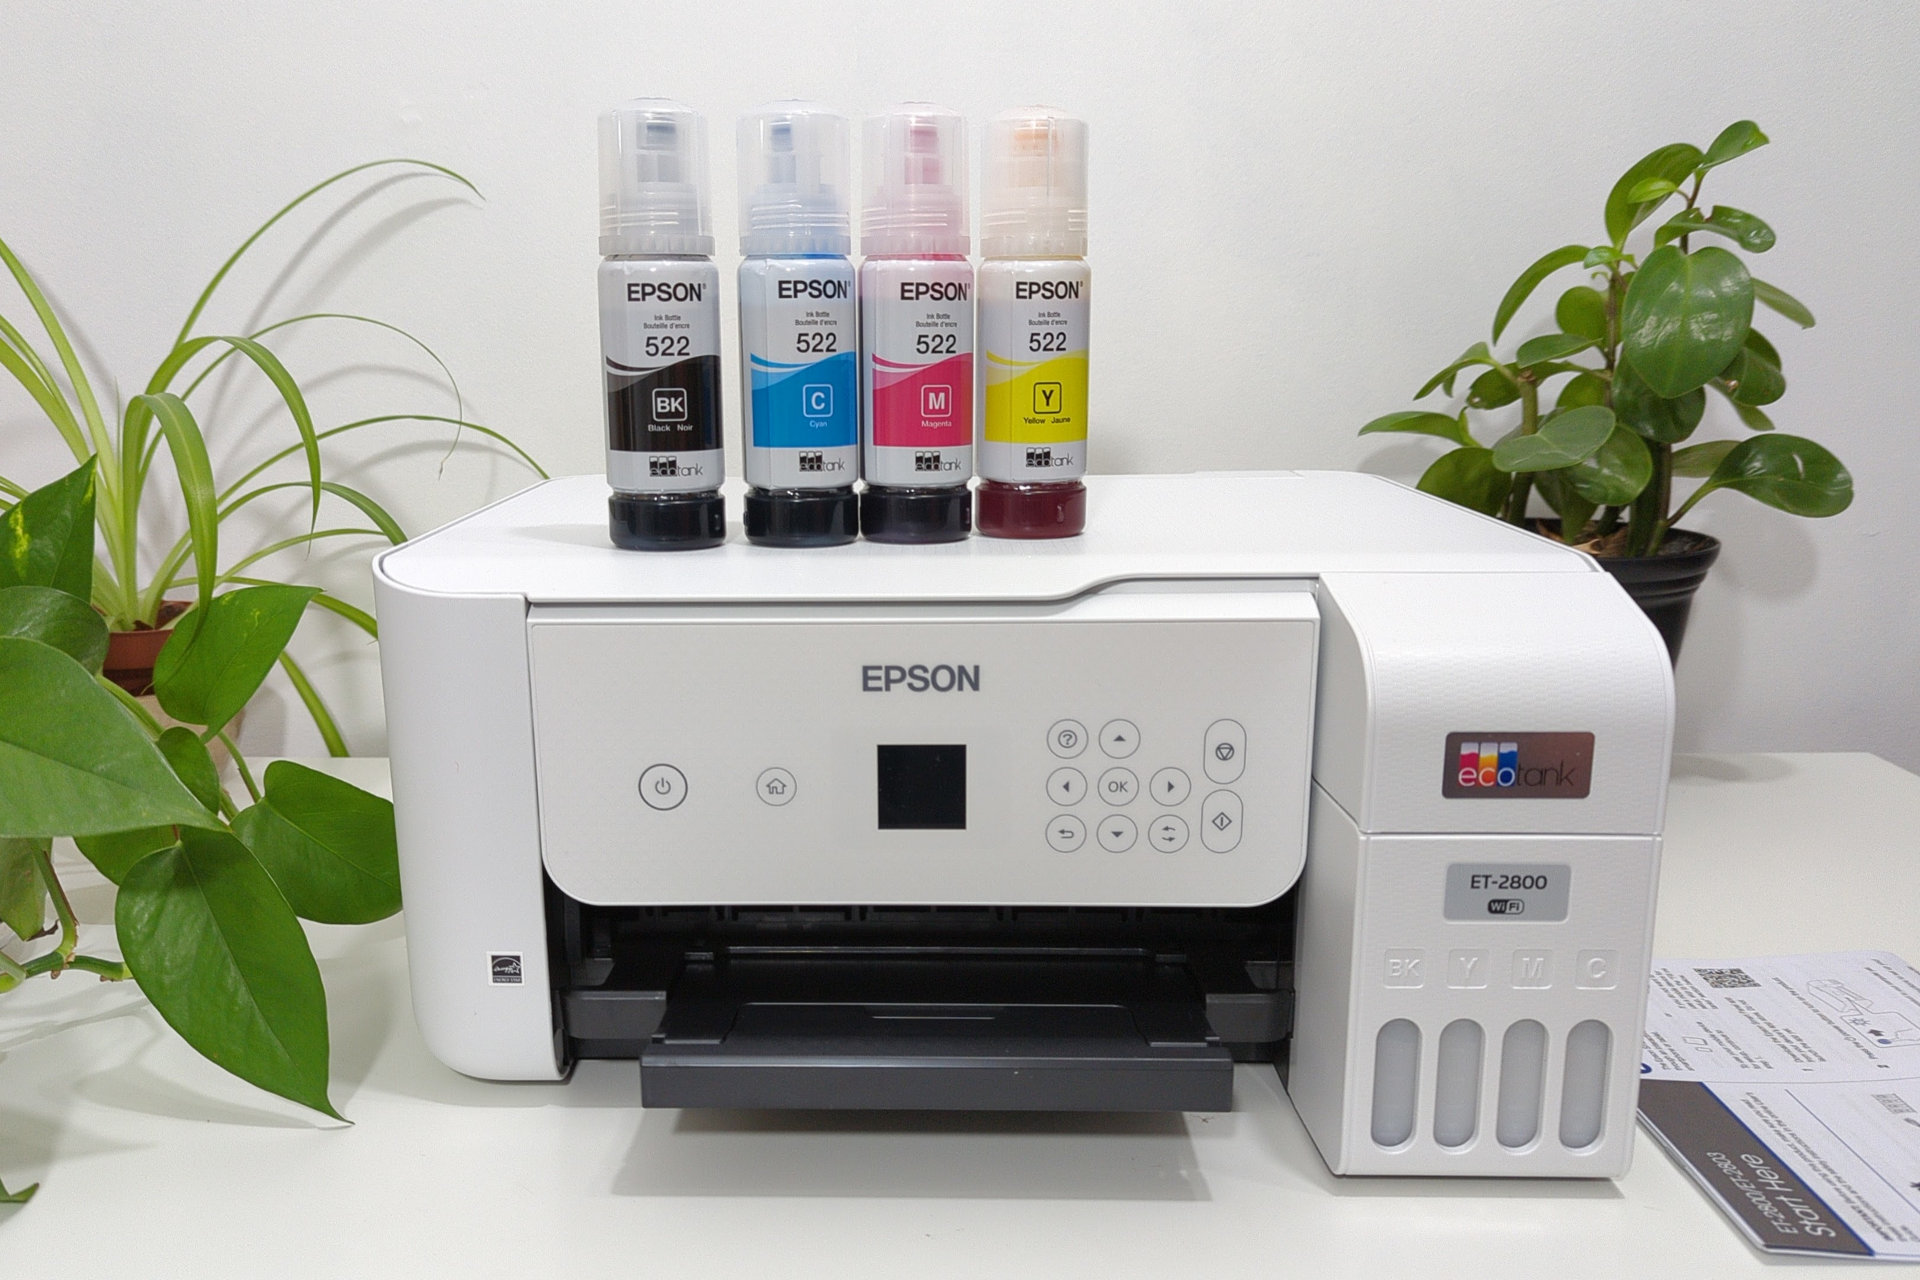 No More Ink Worries: The Game-Changing Epson EcoTank Experience